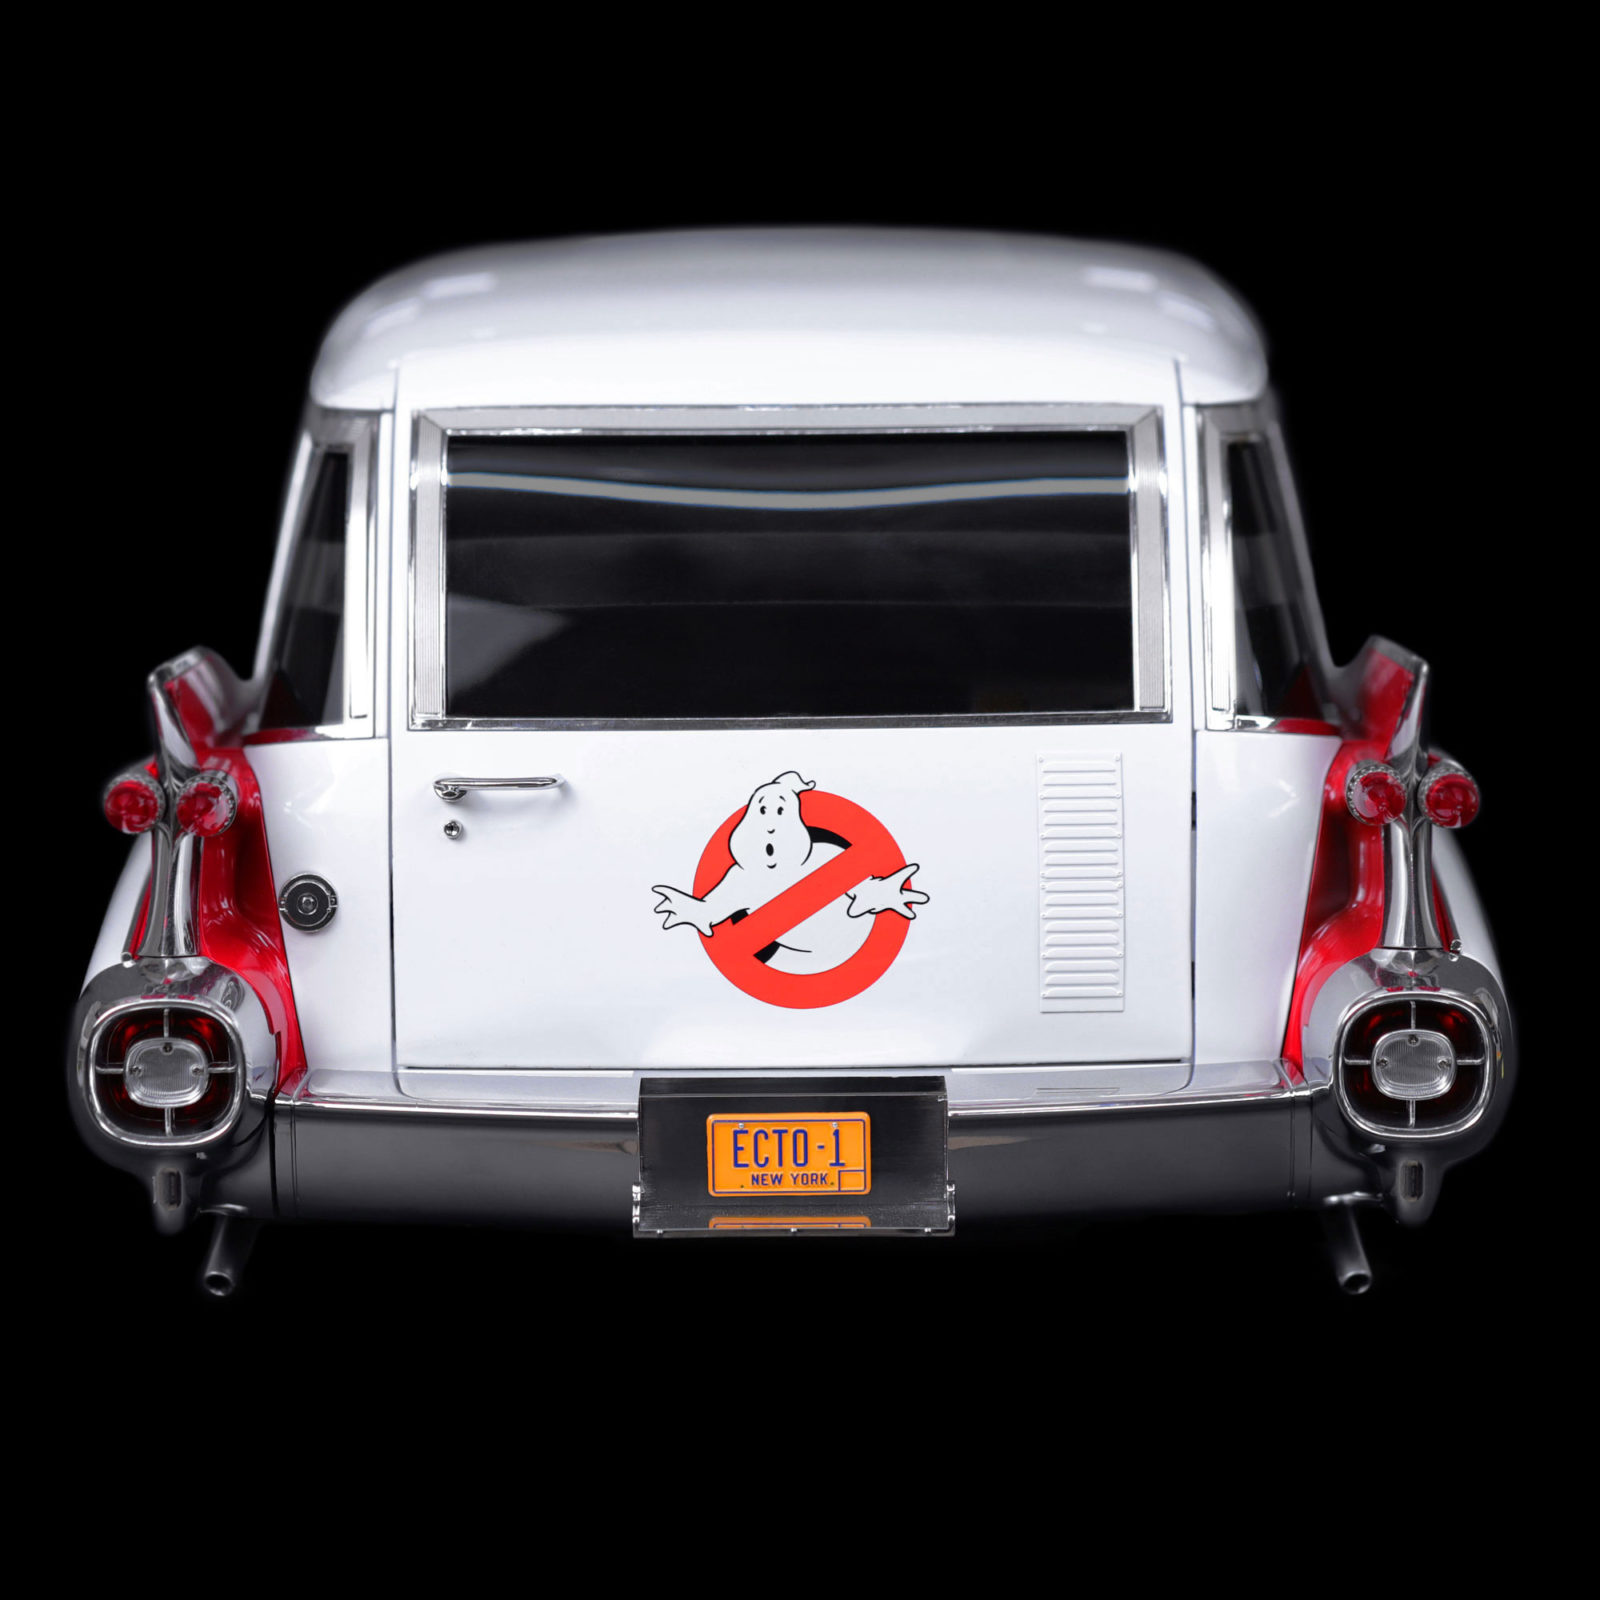 Rear of Ghostbusters Ecto-1 with door vent upgrade installed